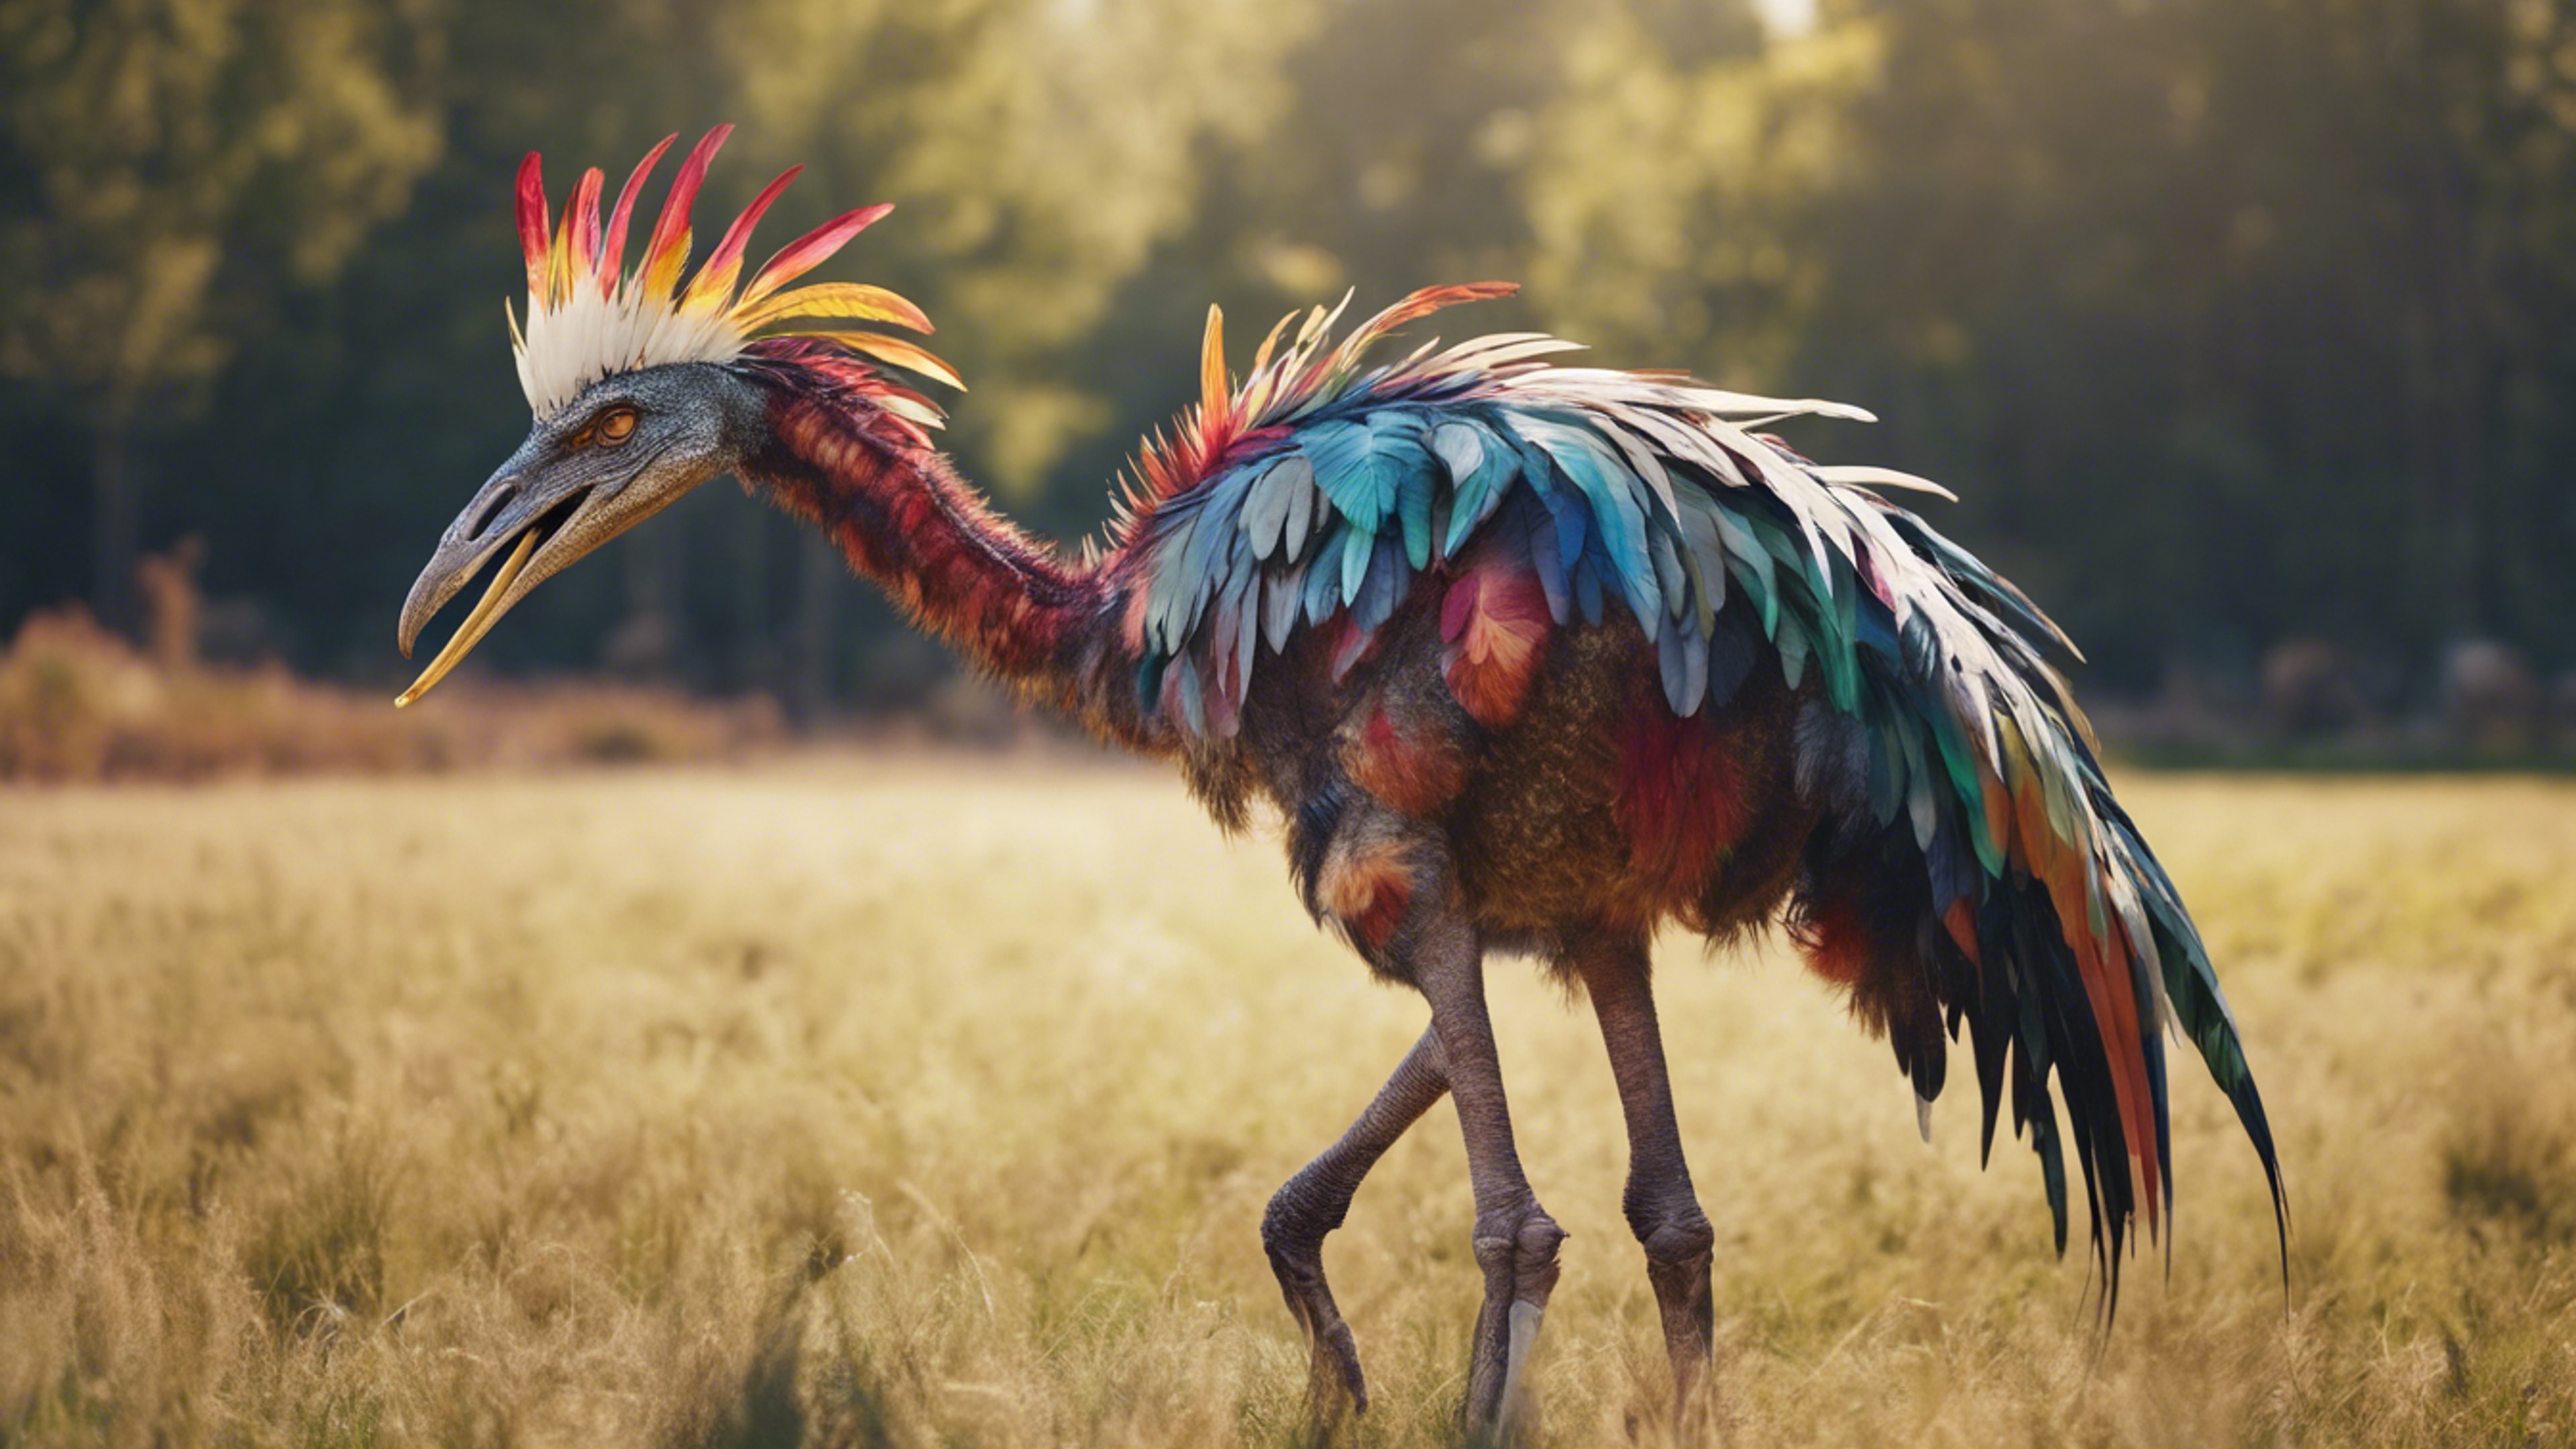 A Struthiomimus with colorful feathers prancing around in an open meadow. Hintergrund[bbeb240df8e5485aba58]